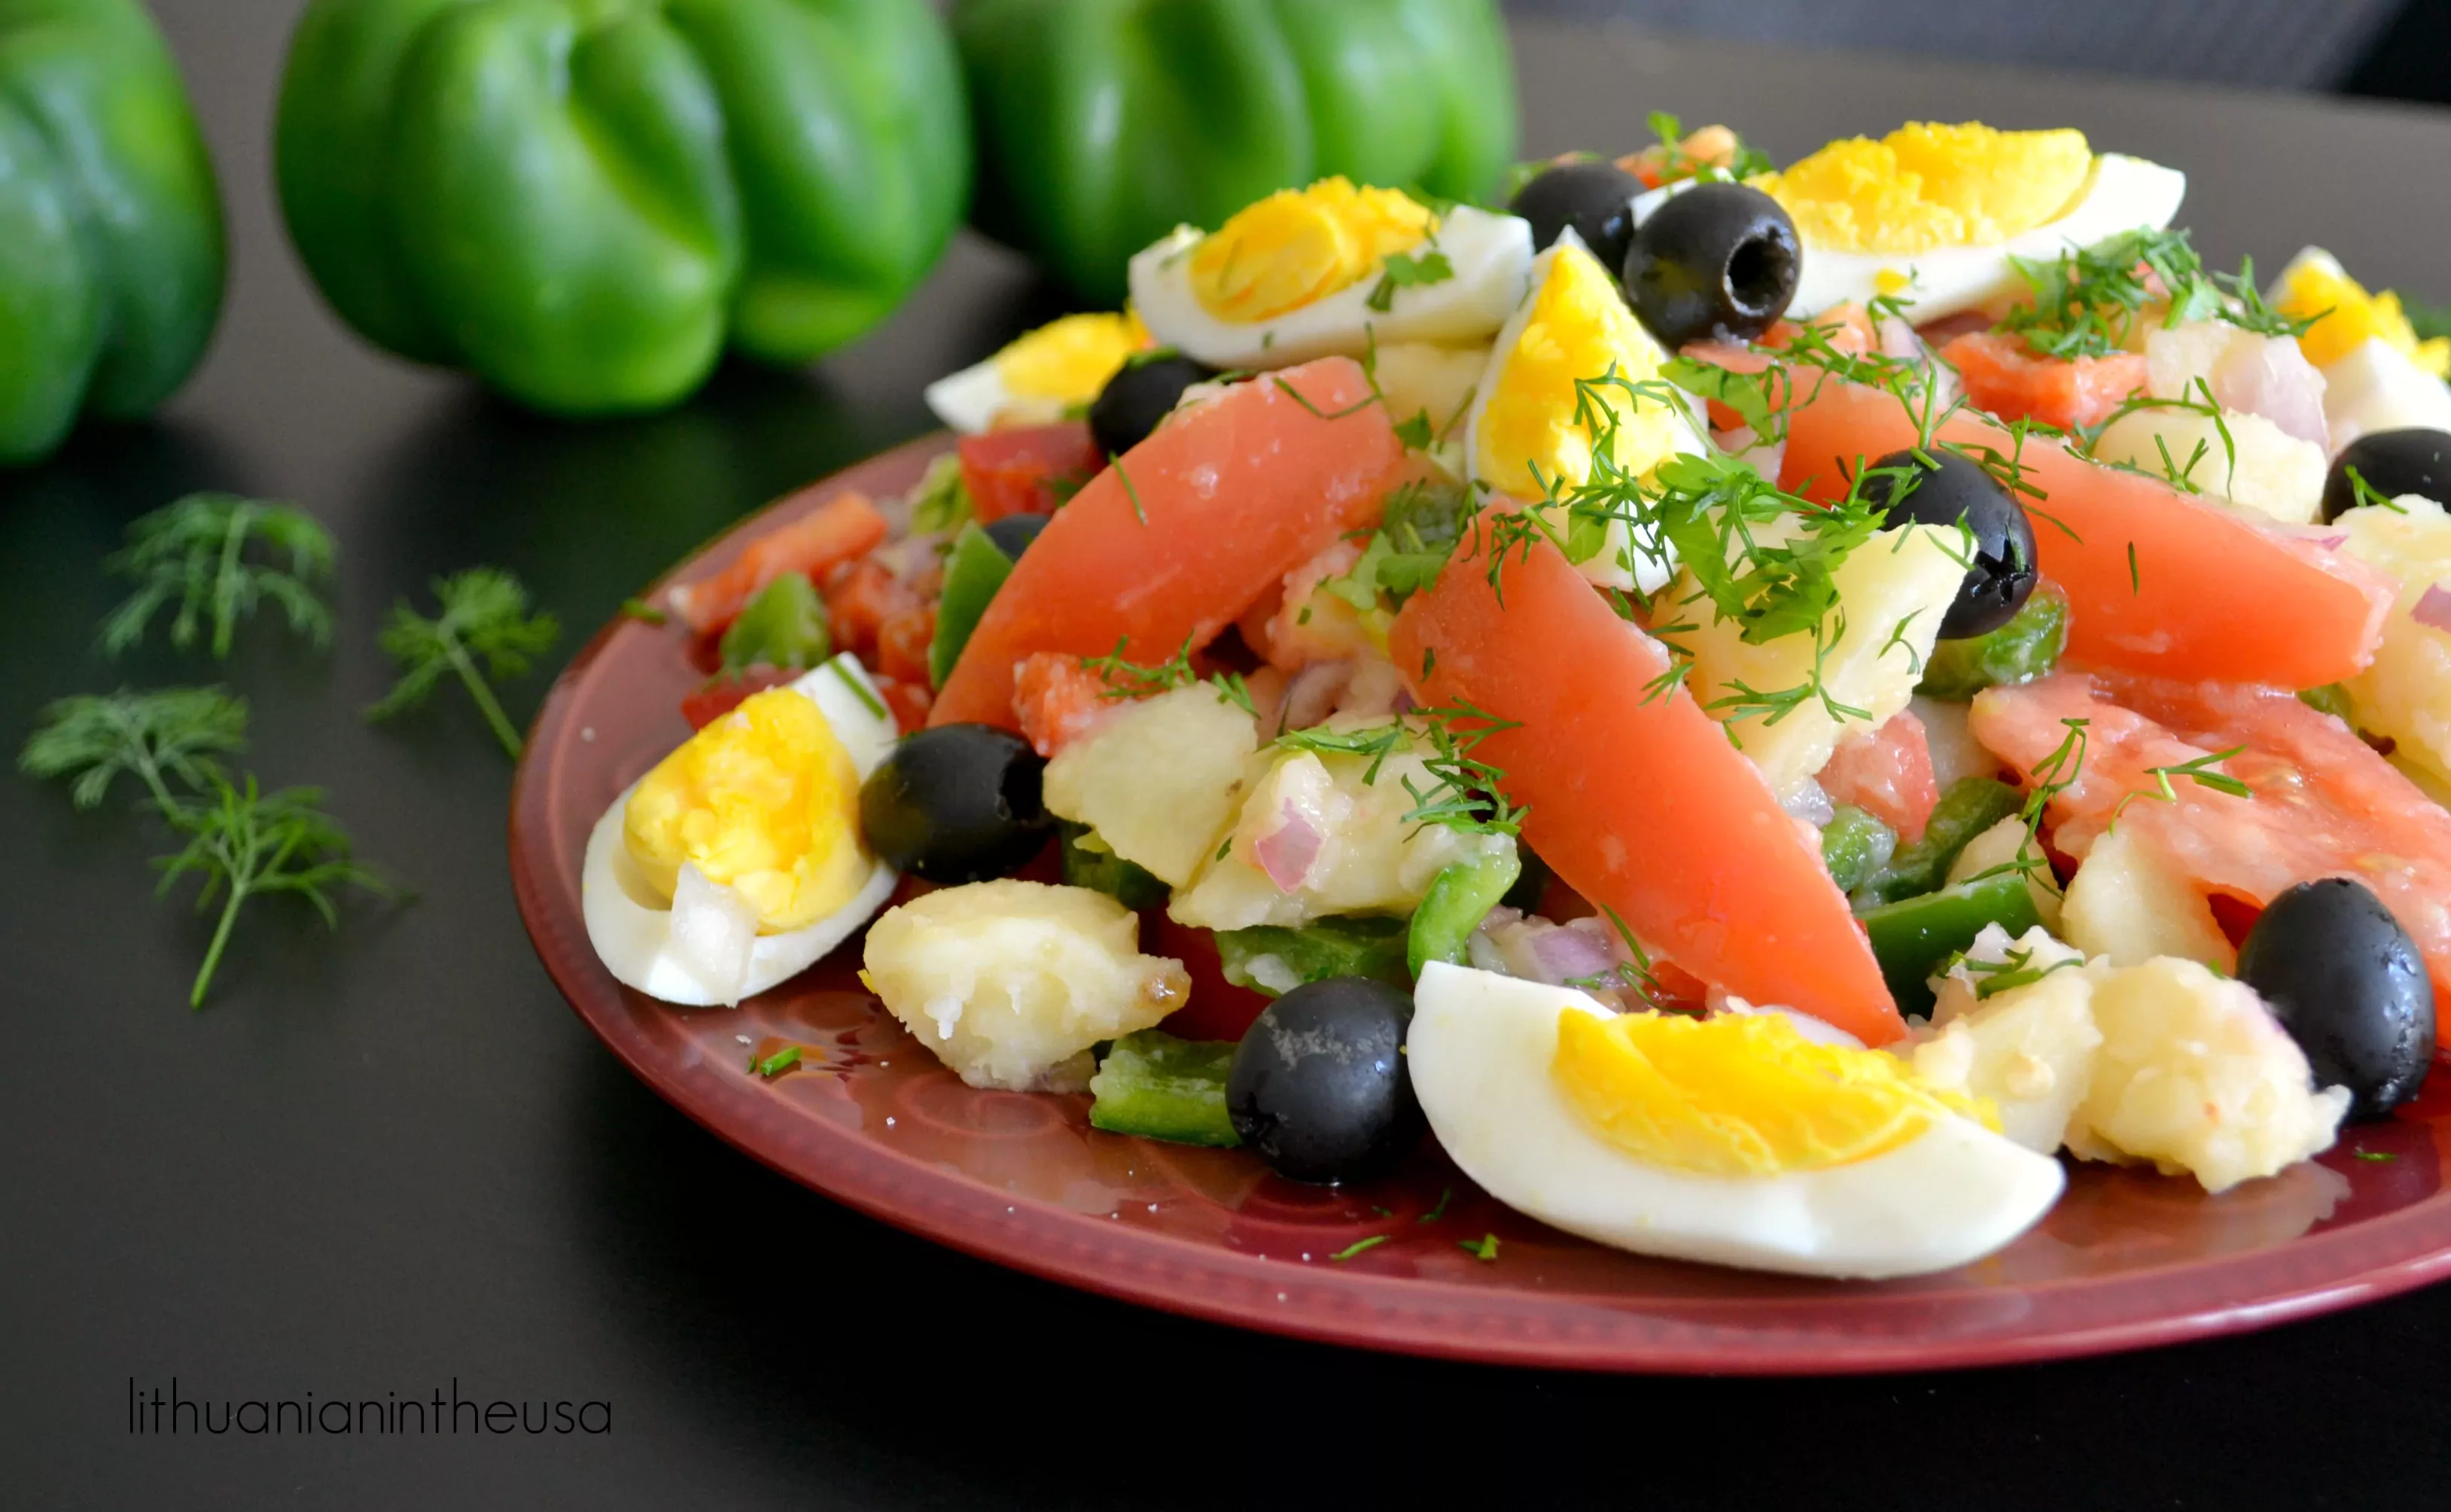 Spanish country salad with potatoes and eggs (Ensalada campera)